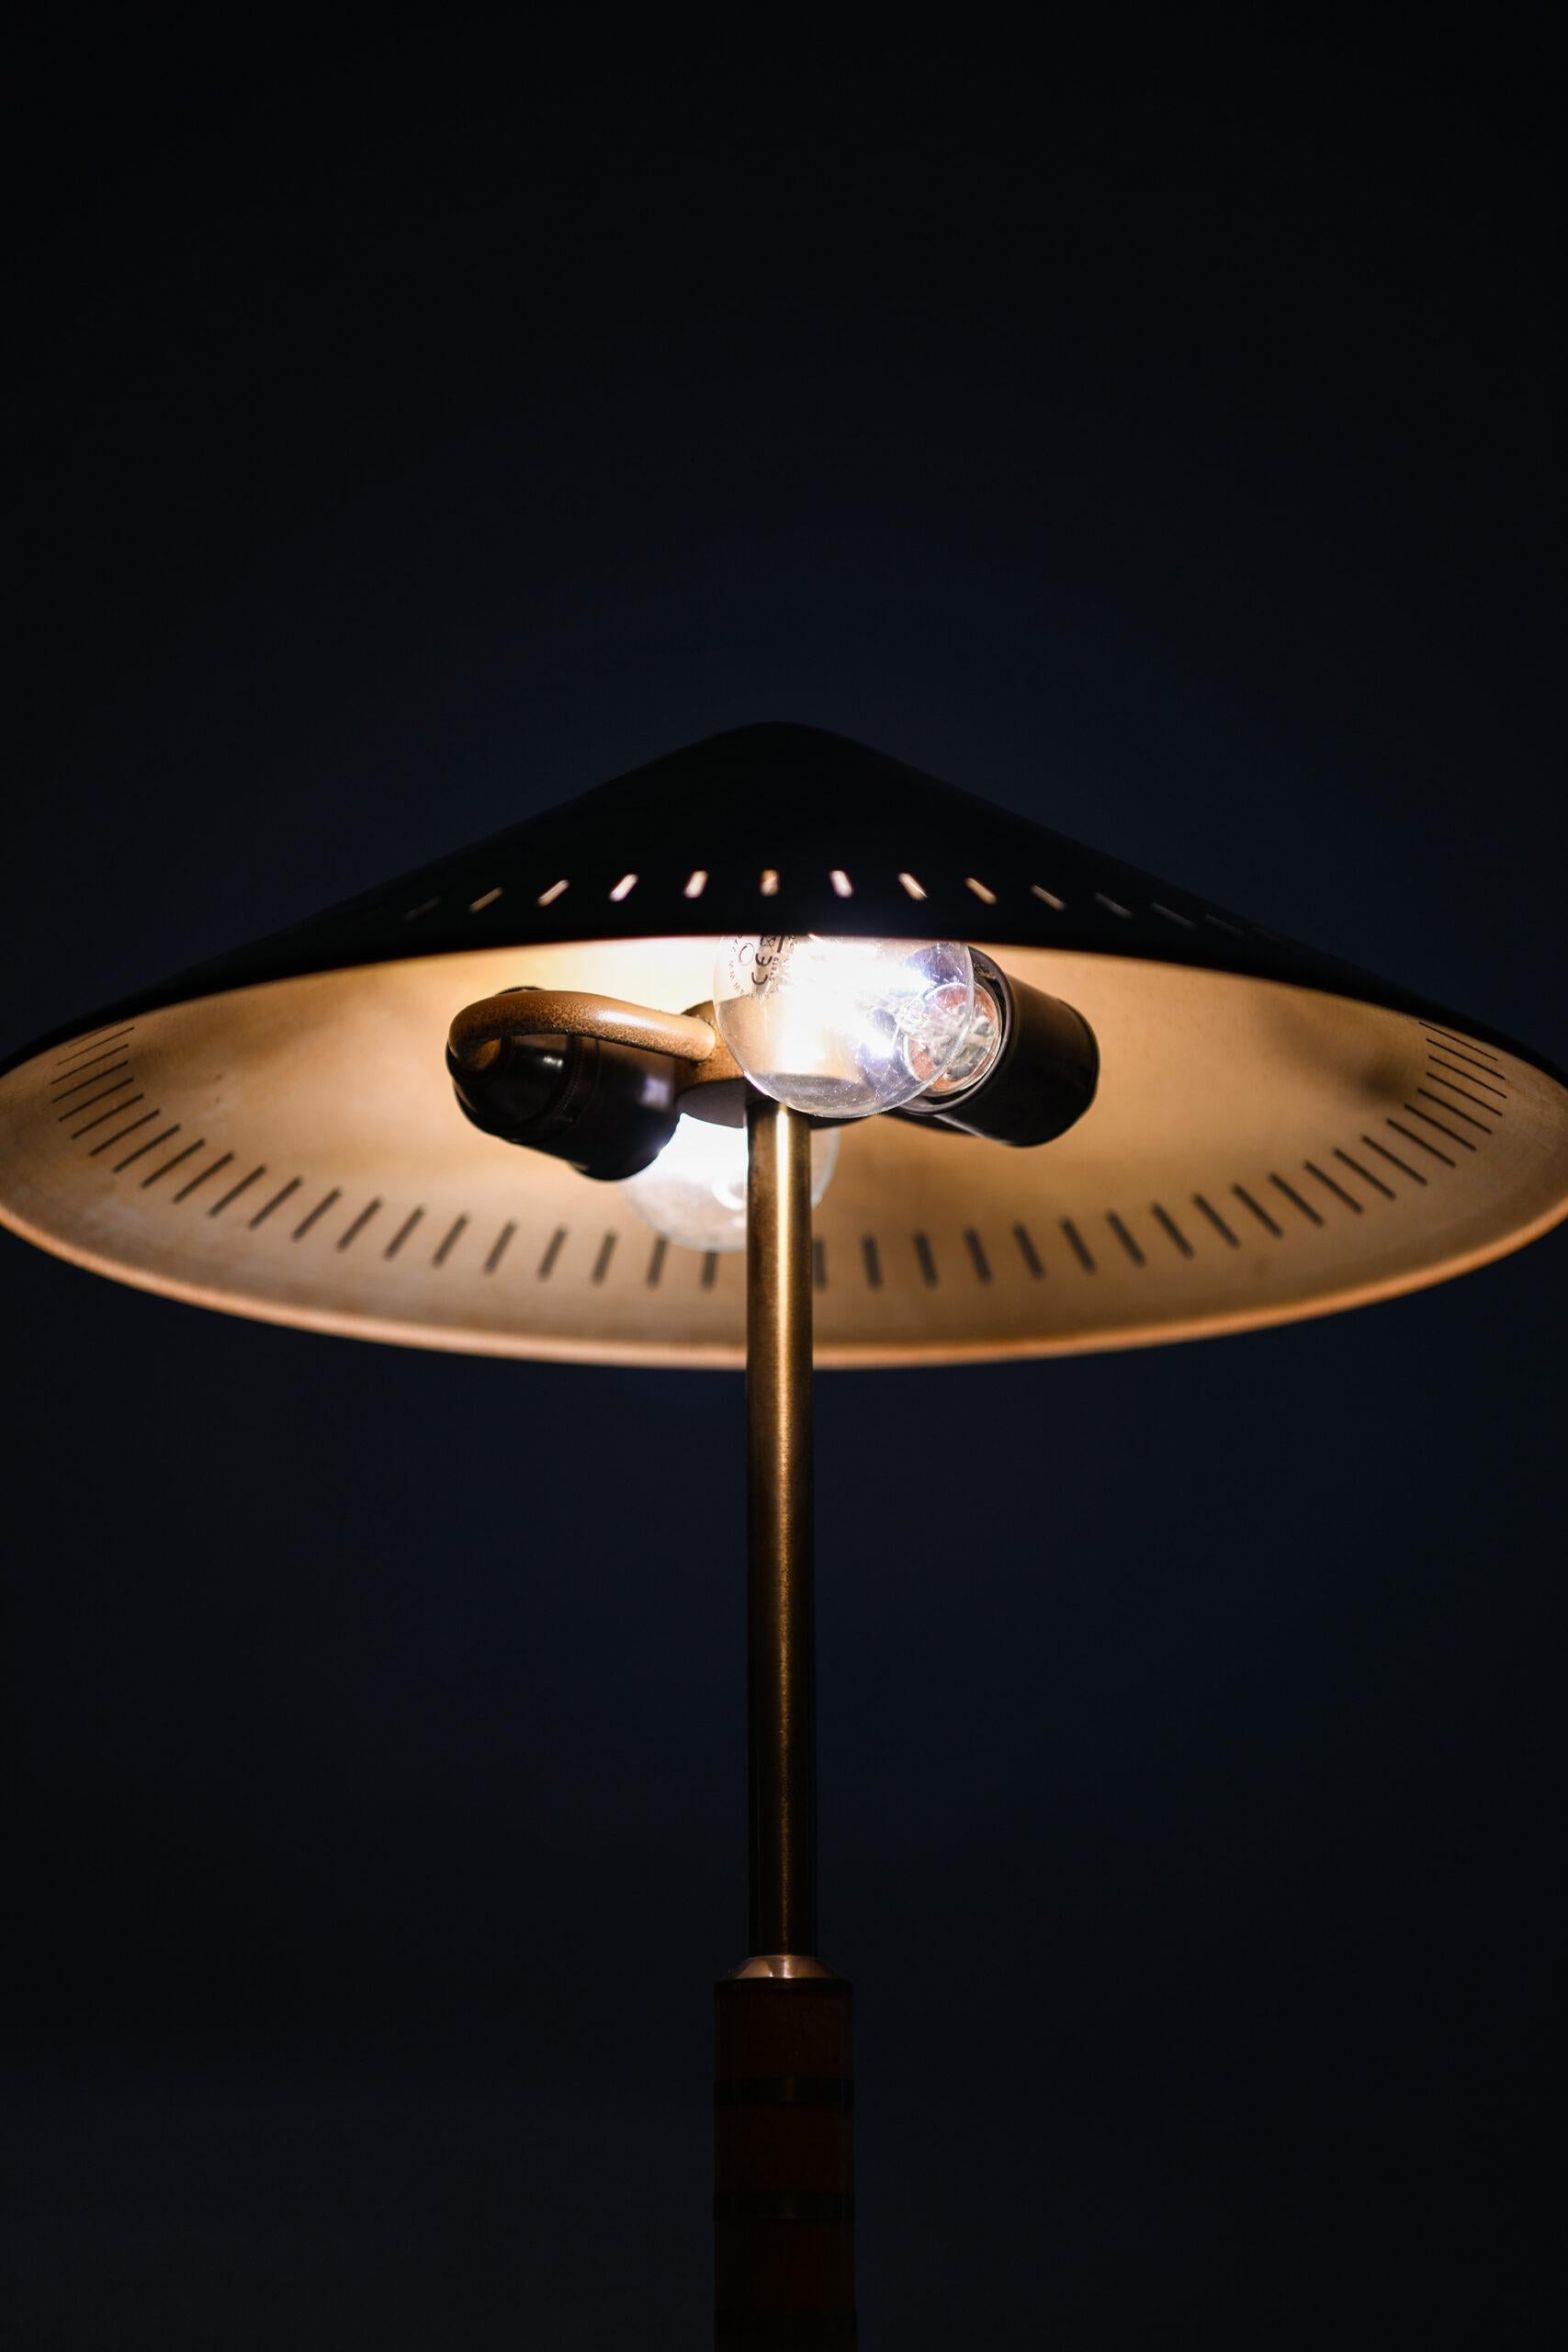 Mid-20th Century Bent Karlby Table Lamp Produced by Lyfa in Denmark